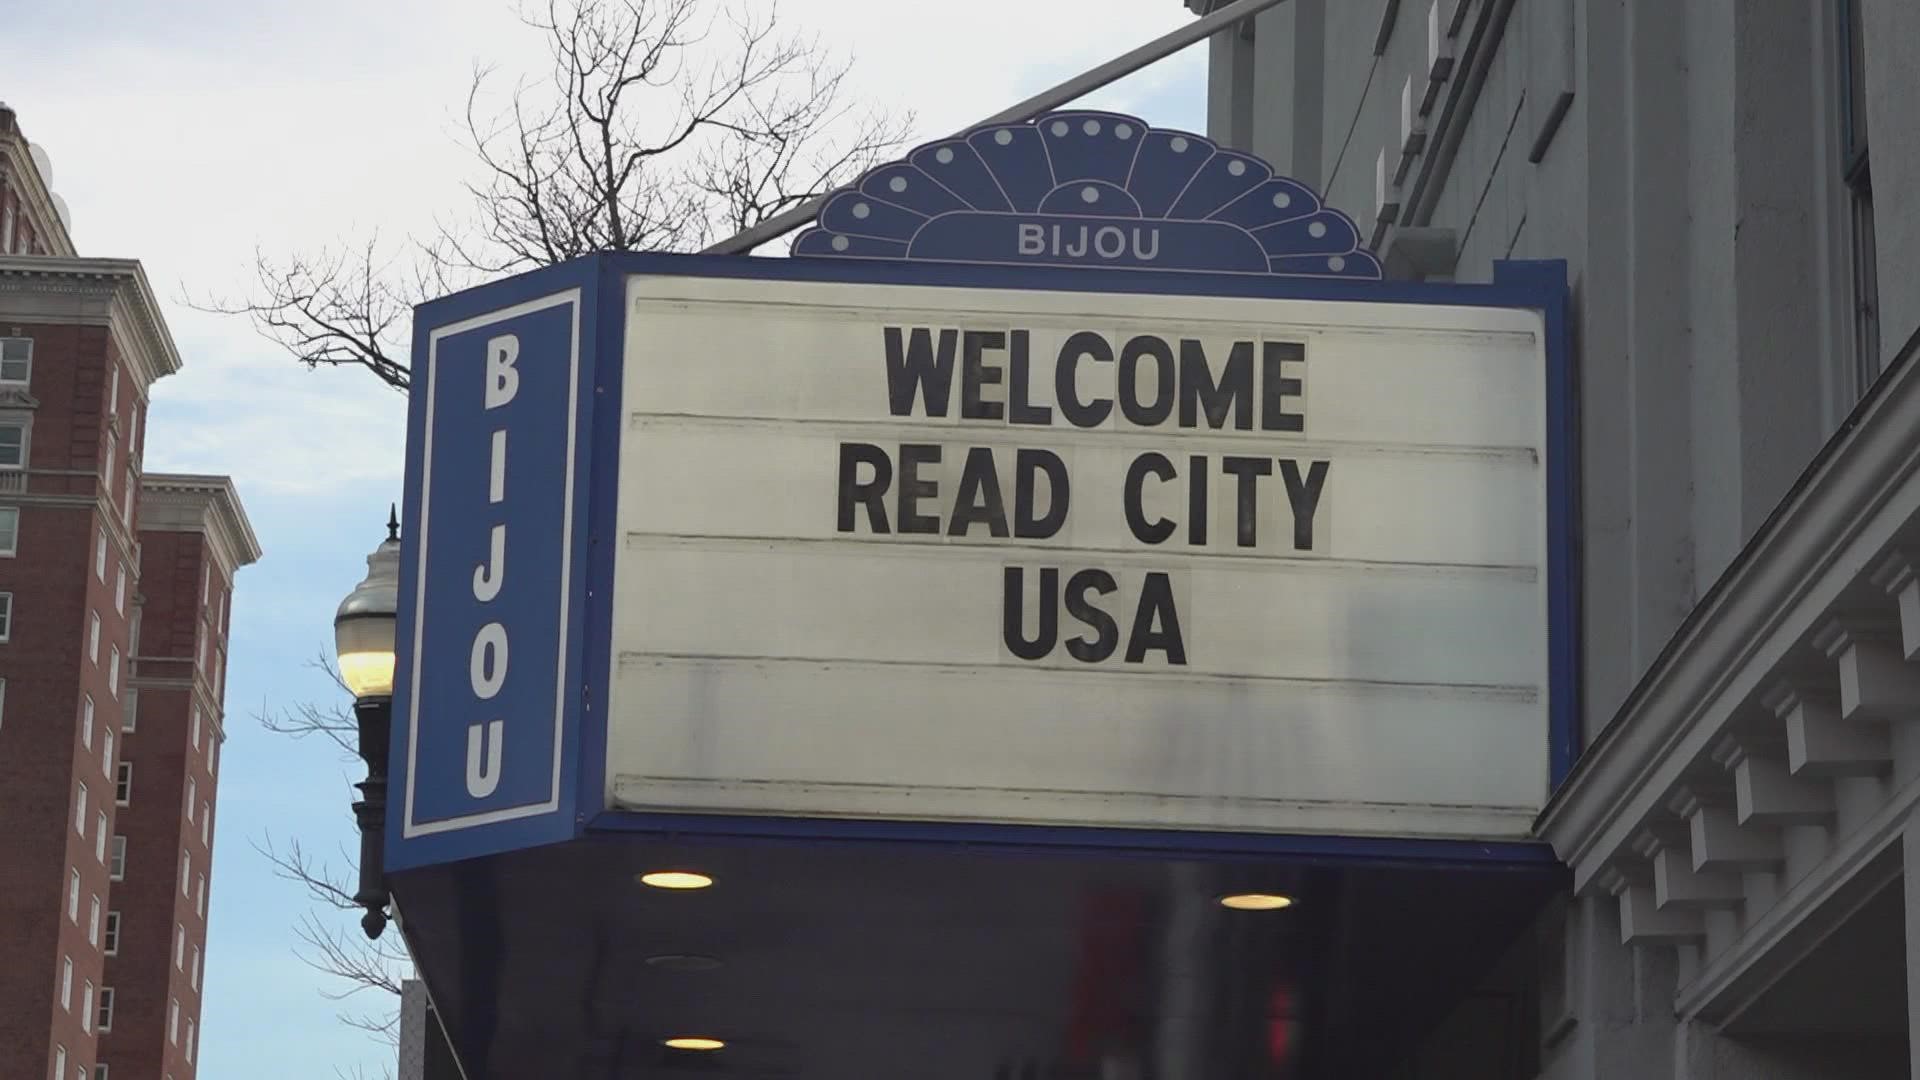 Knox County Mayor Glenn Jacobs is challenging the community to clock in a collective total of one million reading hours over the year.